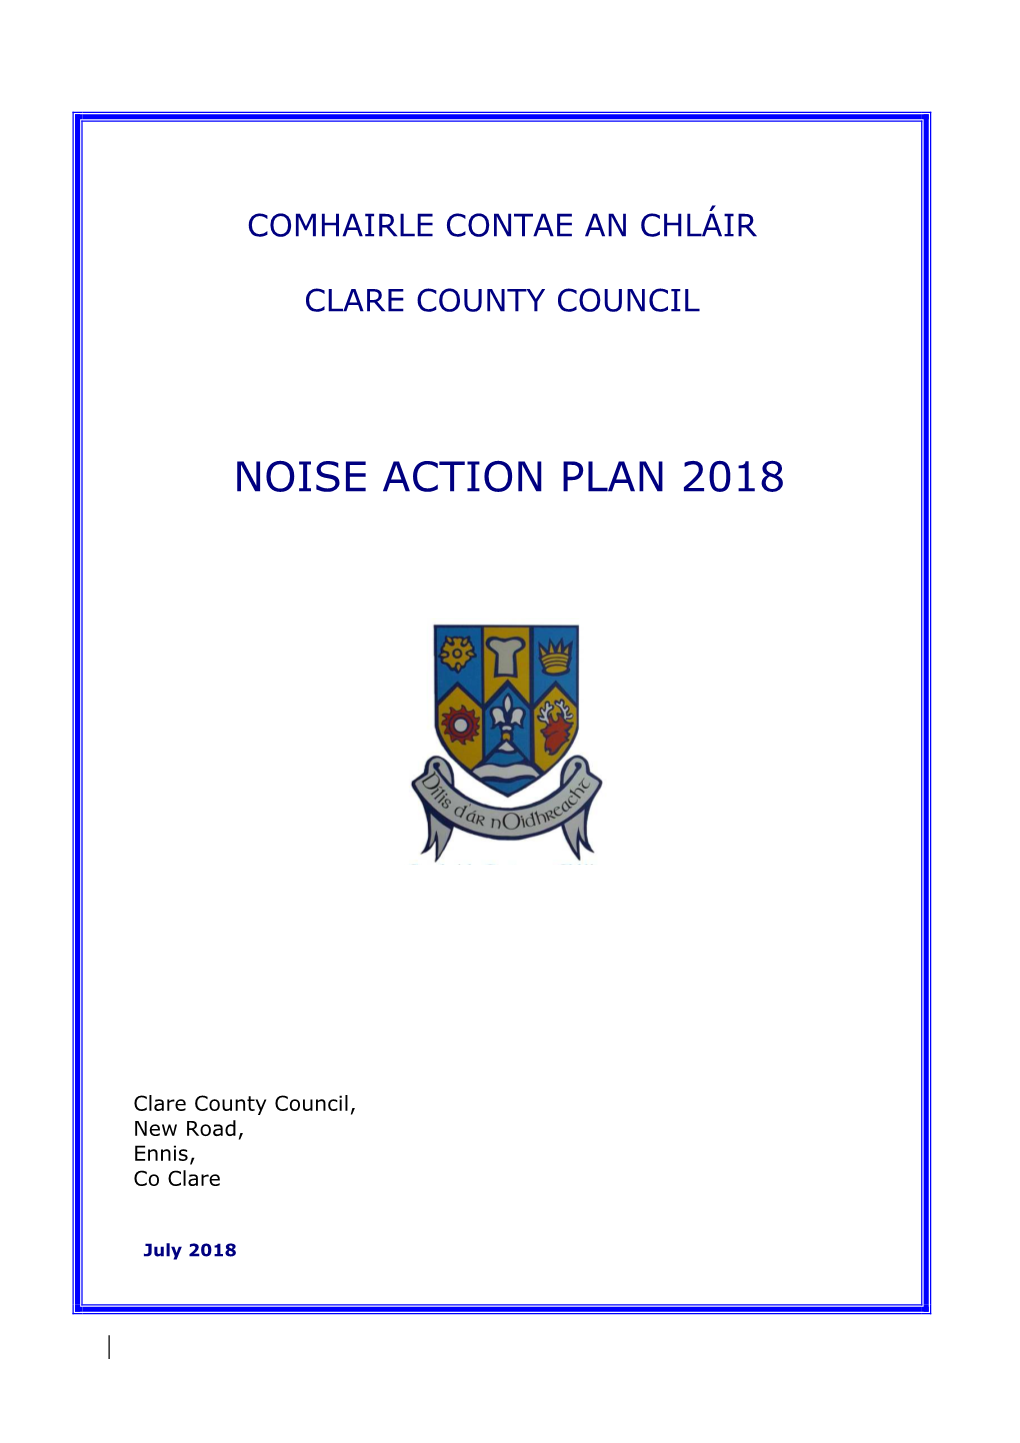 Noise Action Plan 2018